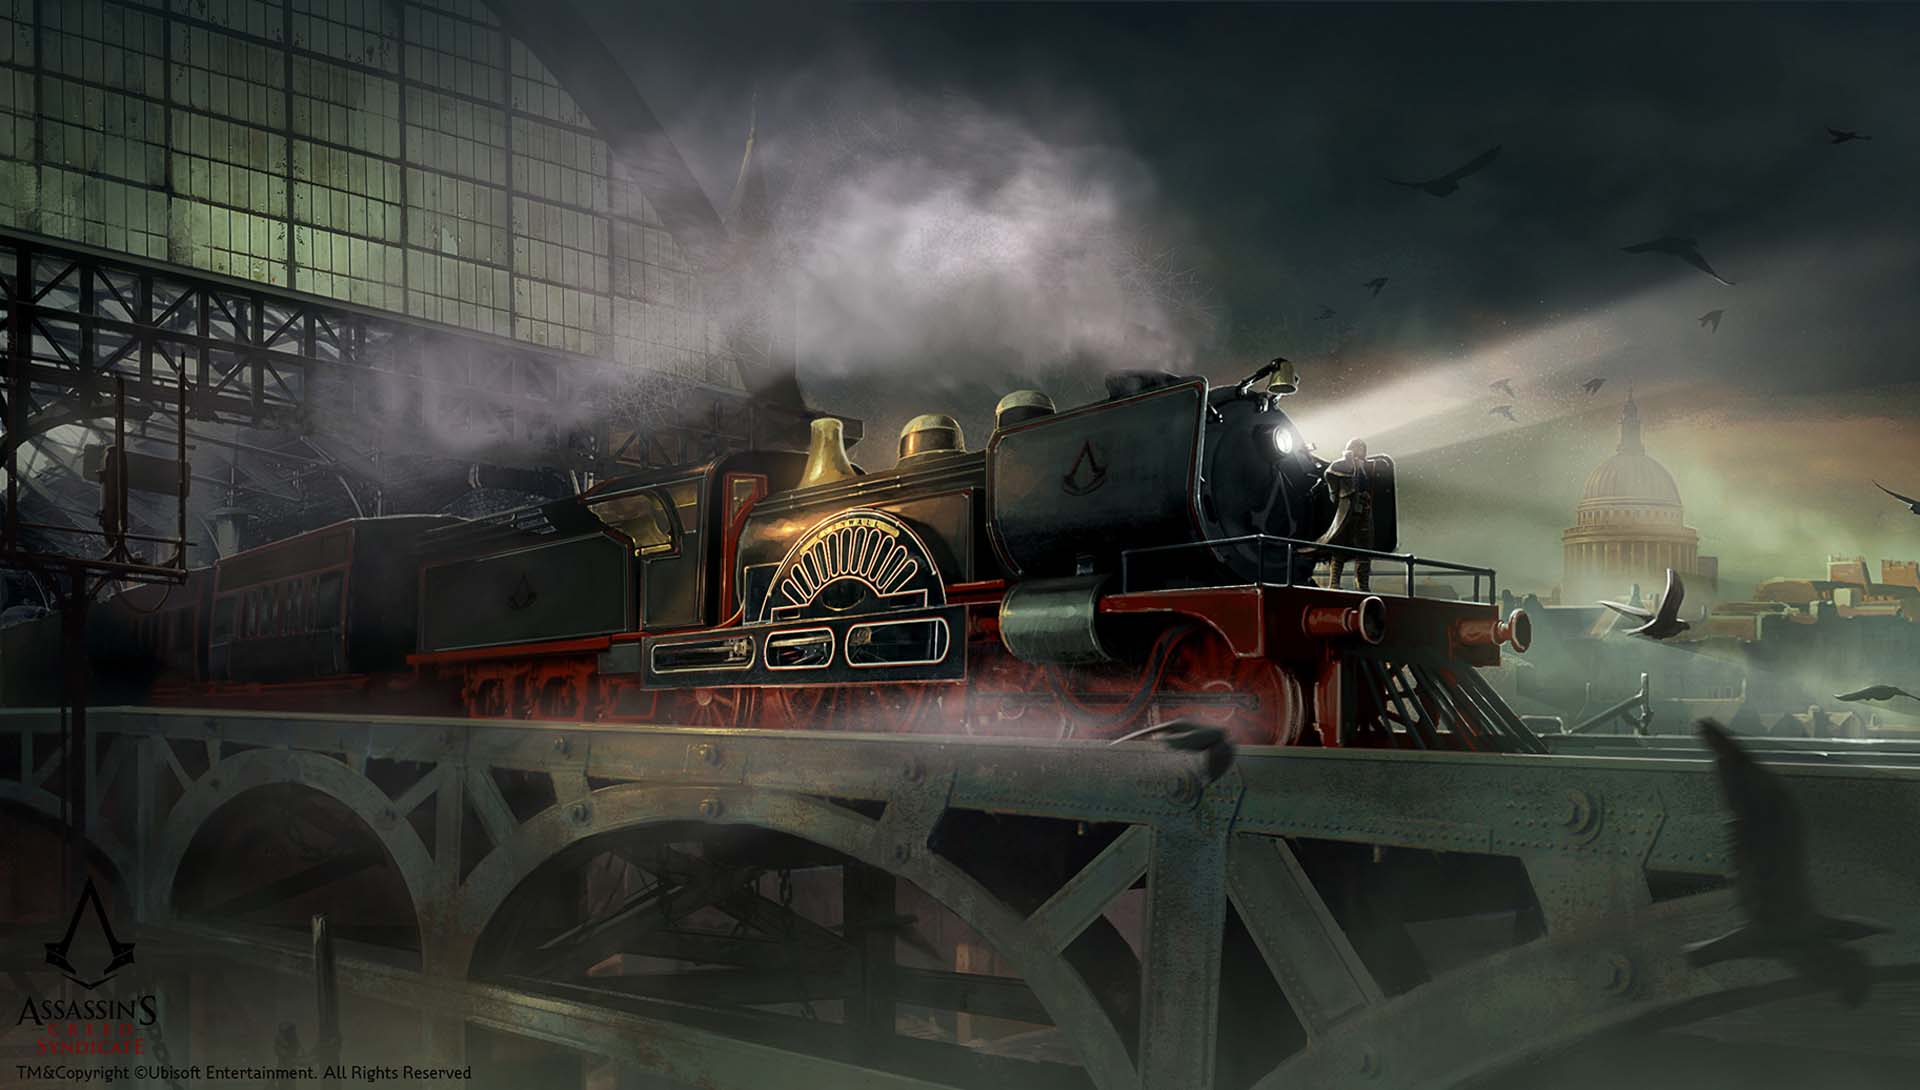 Locomotive d'Assassin's Creed Syndicate